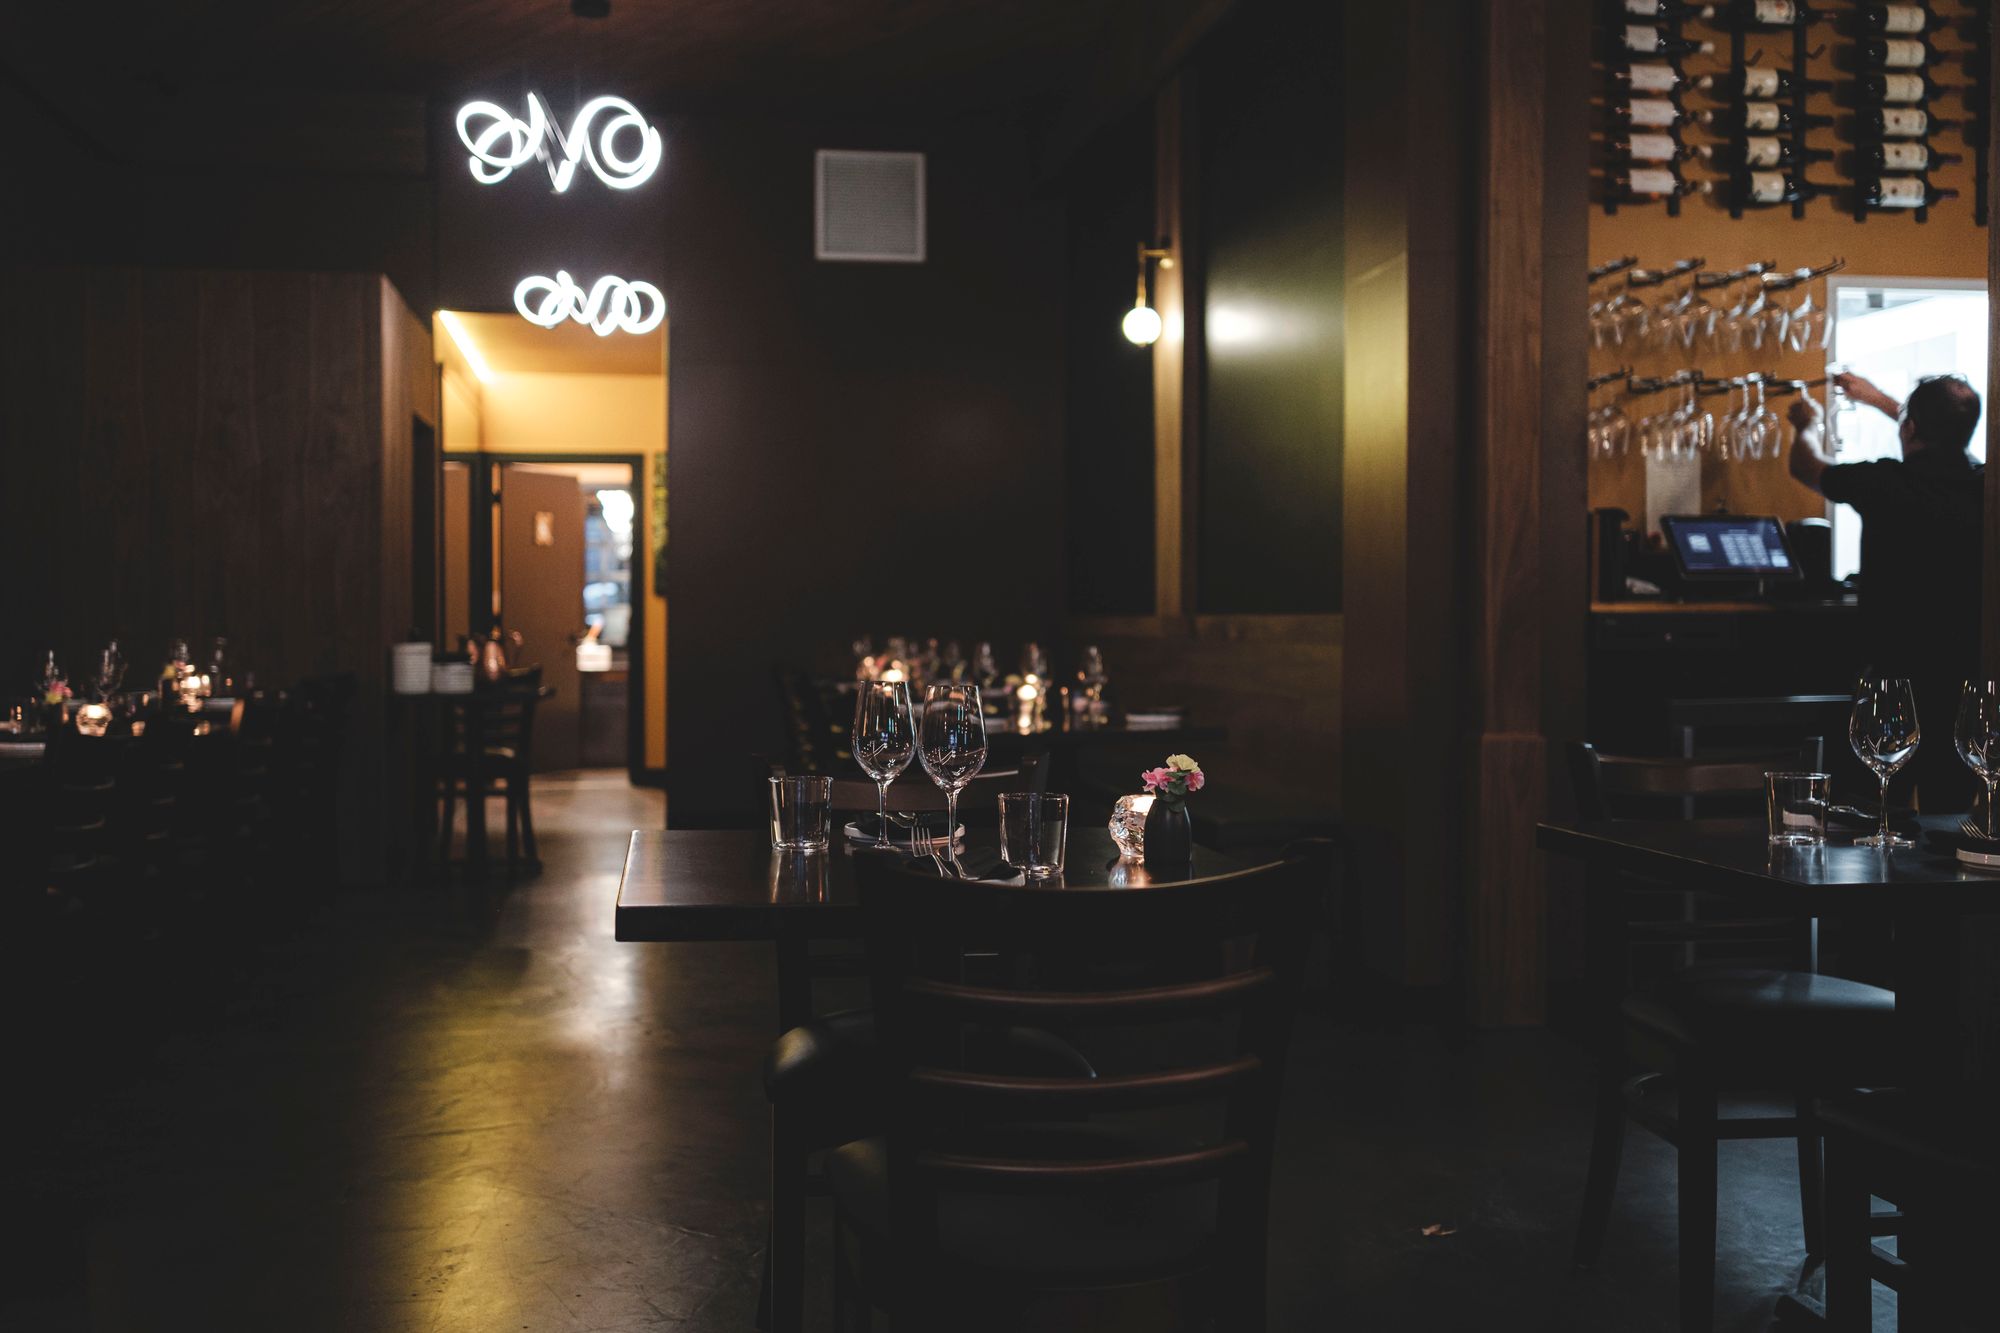 Black Walnut [OVERVIEW] – The Dry-Aged Fish Haven of Vancouver's Cambie Village